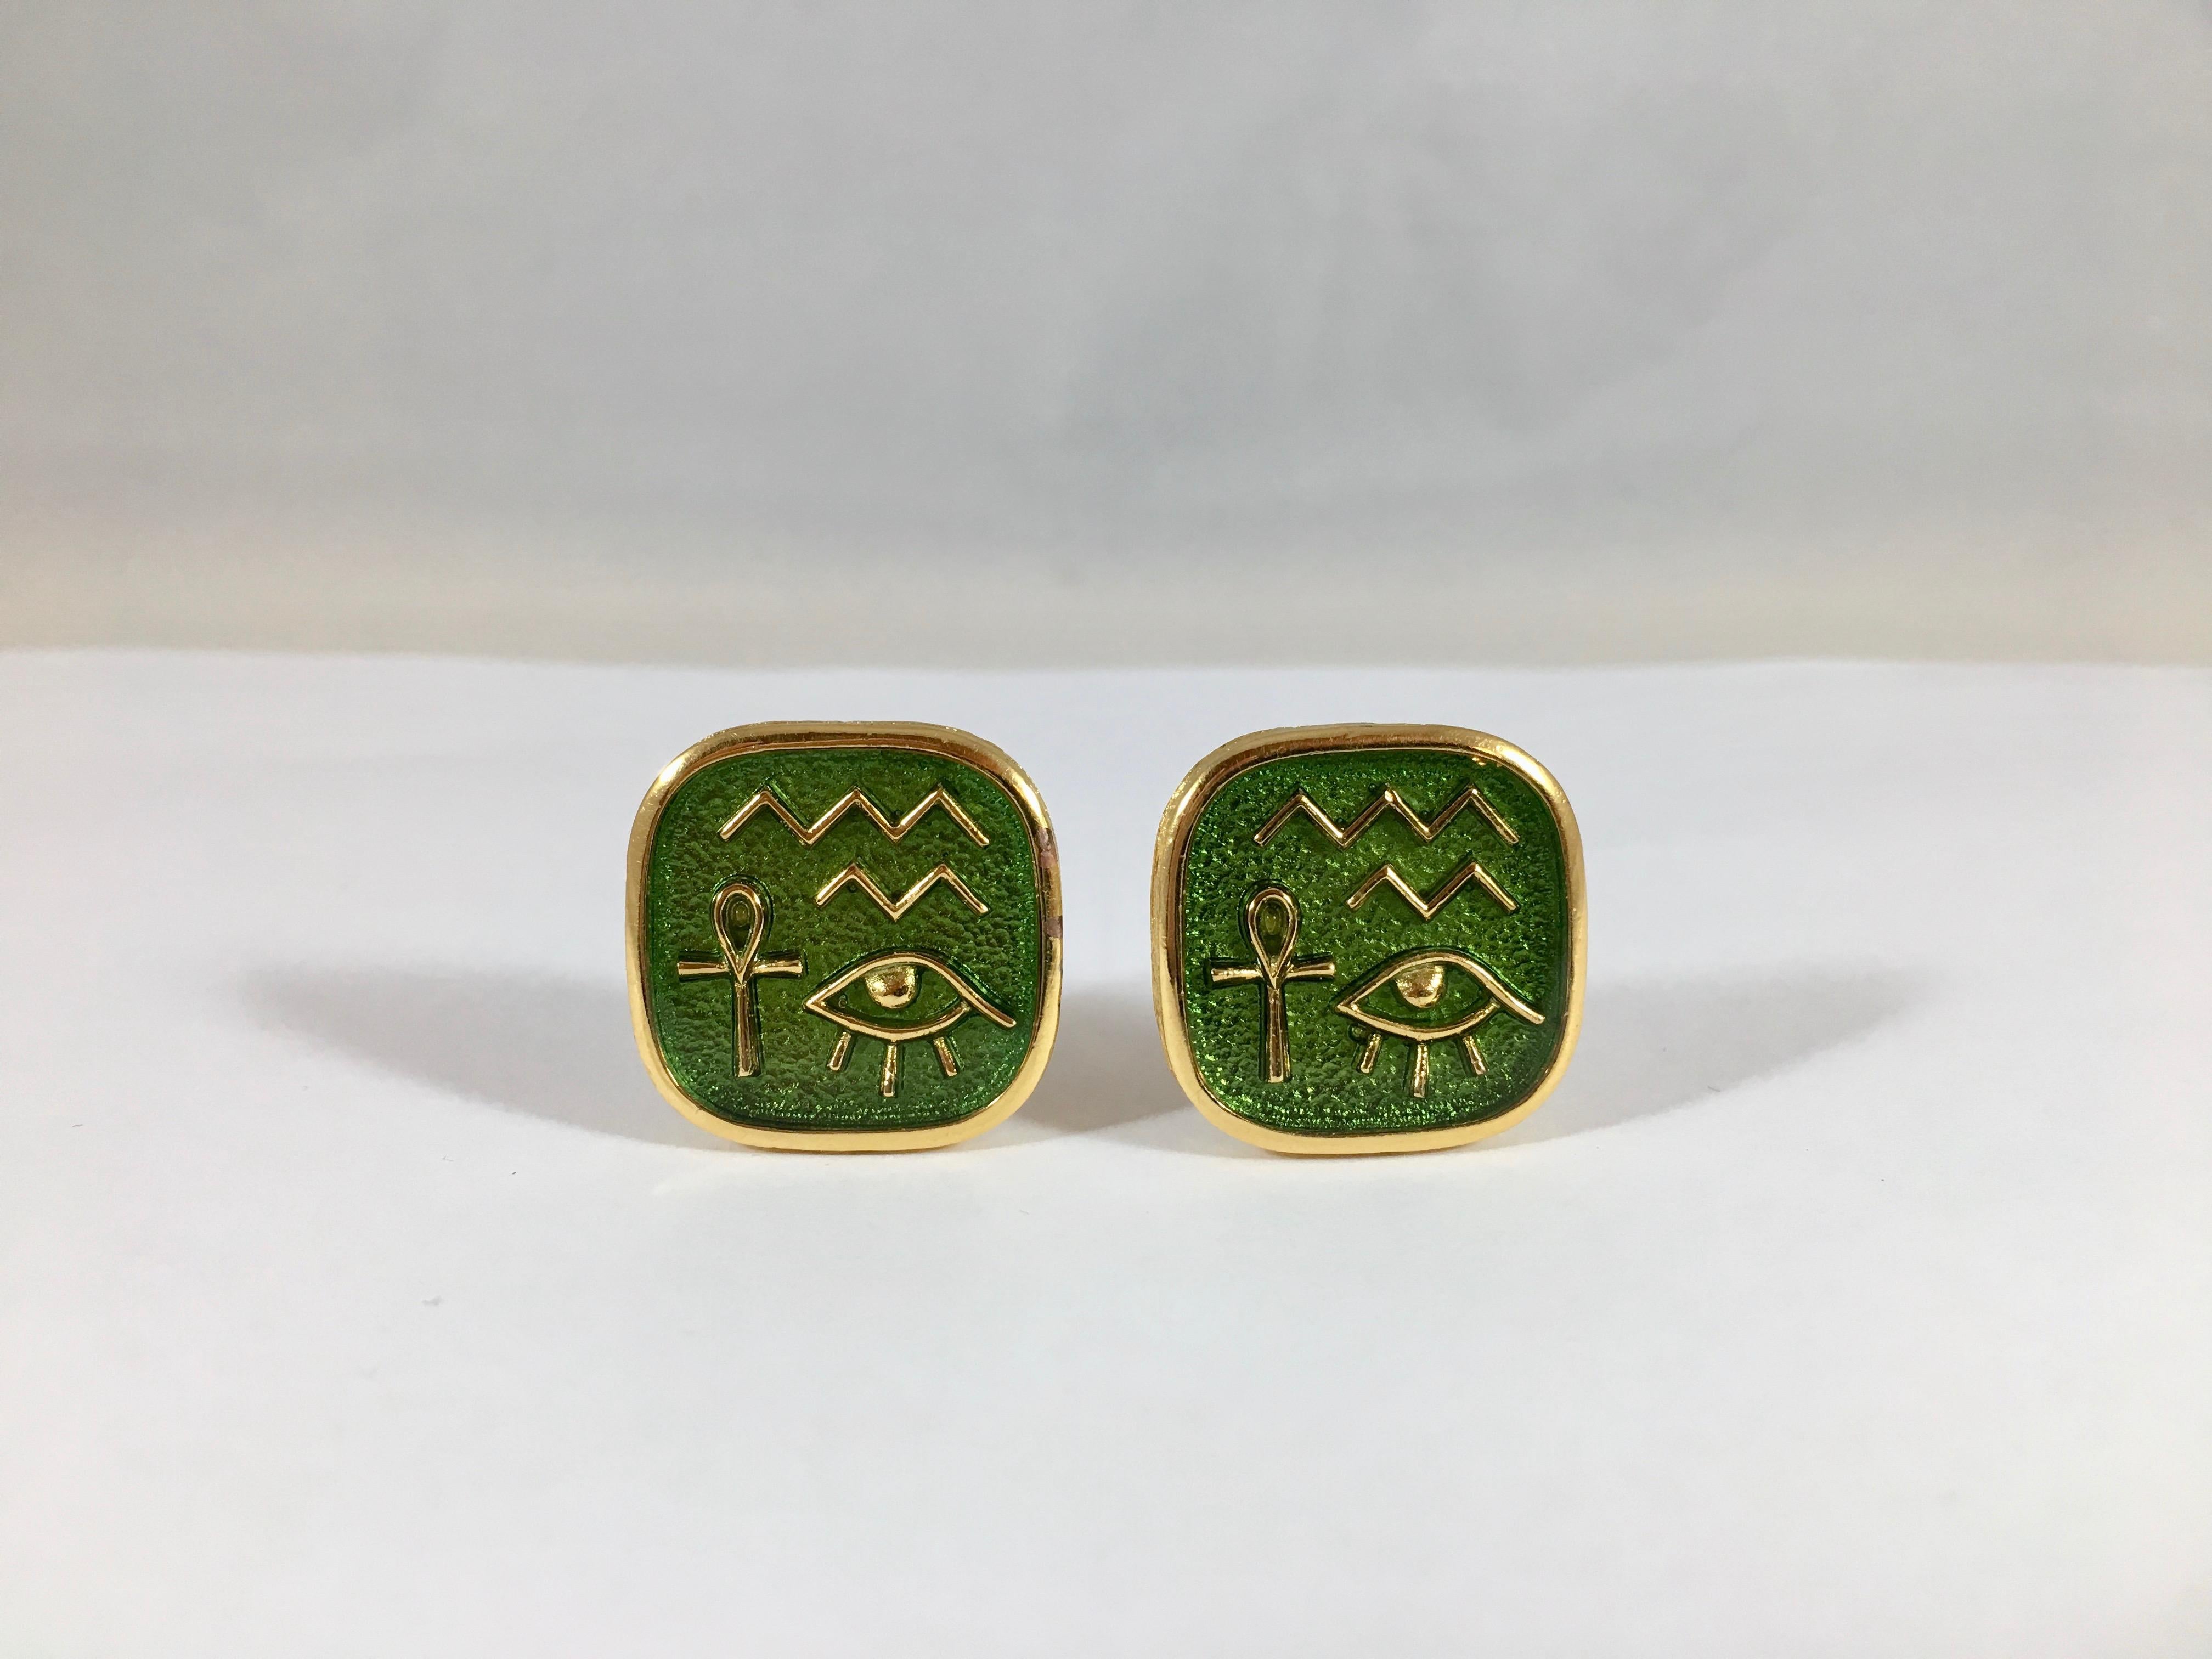 This is a an amazing pair of green 1970s Trifai Egyptian inspired clip-on earrings. They are goldtone metal with a green enamel ground that has Egyptian Hieroglyps on them. They measure 7/8 inches x 7/8 inches and are marked 'Trifari' on the back of